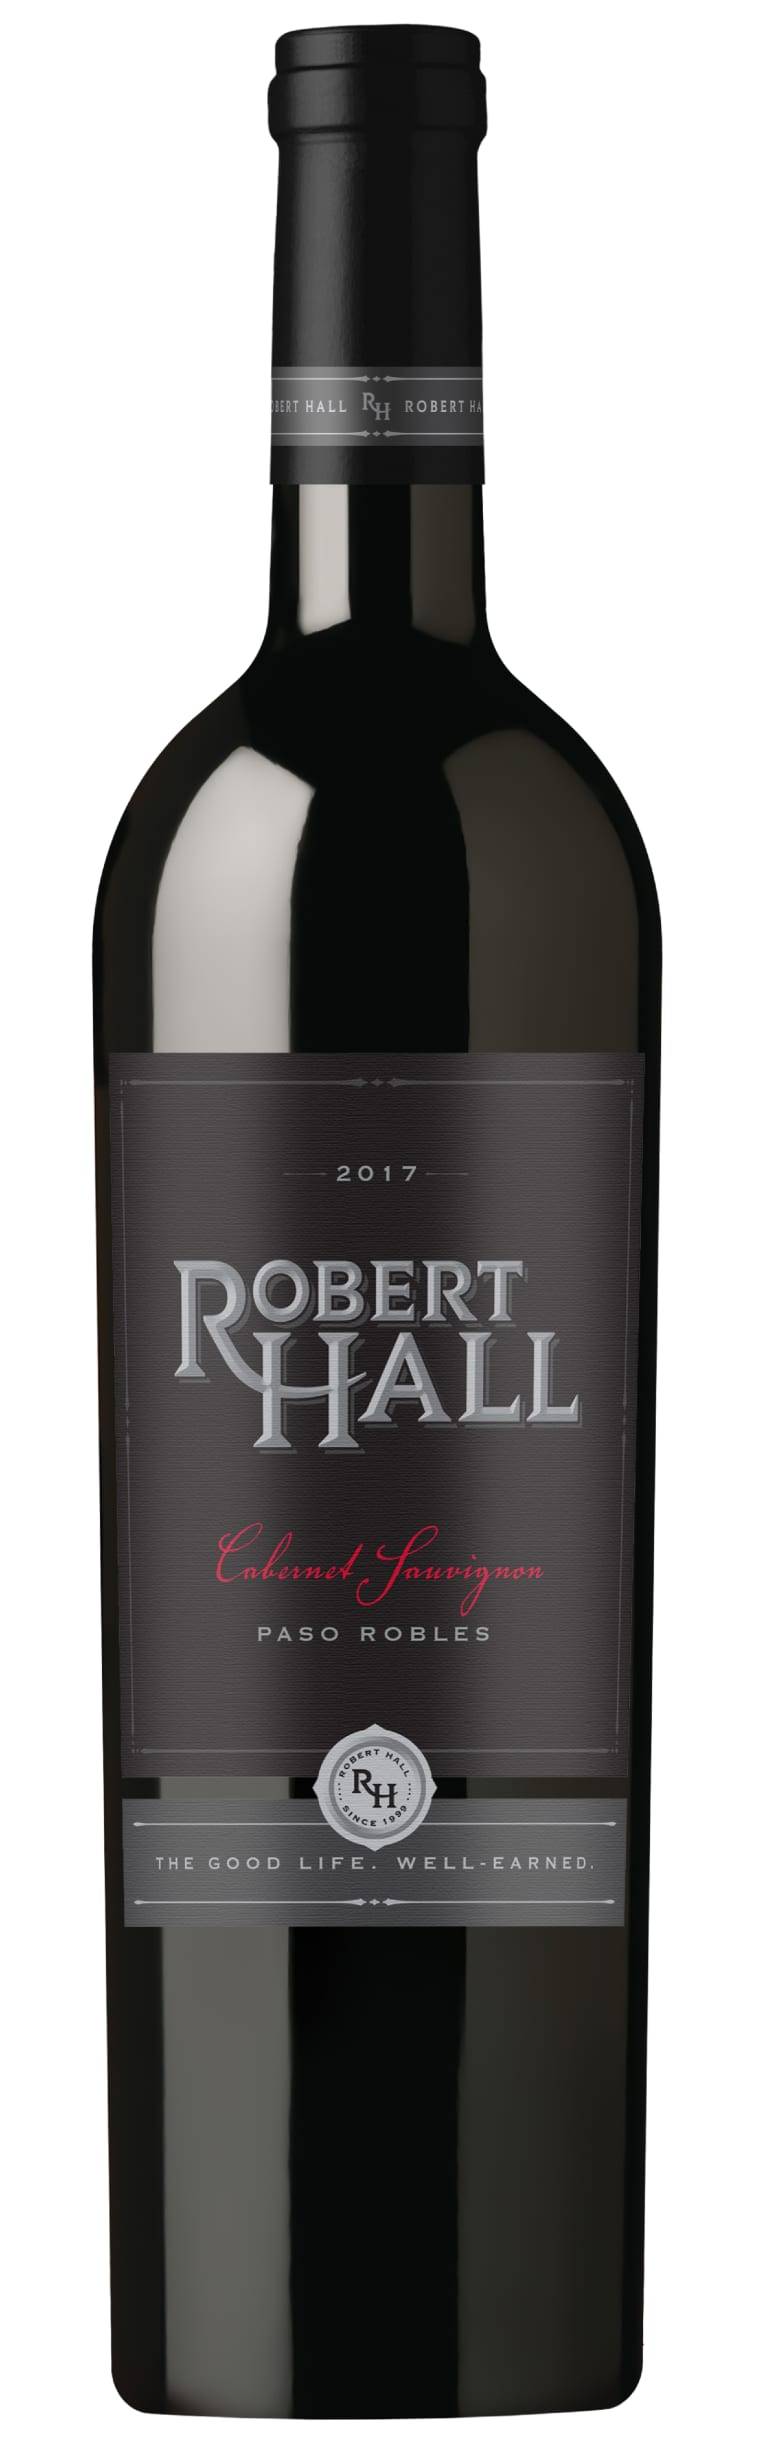 ROBERT HALL PASO ROBLES 2017 RED WINE 750ML